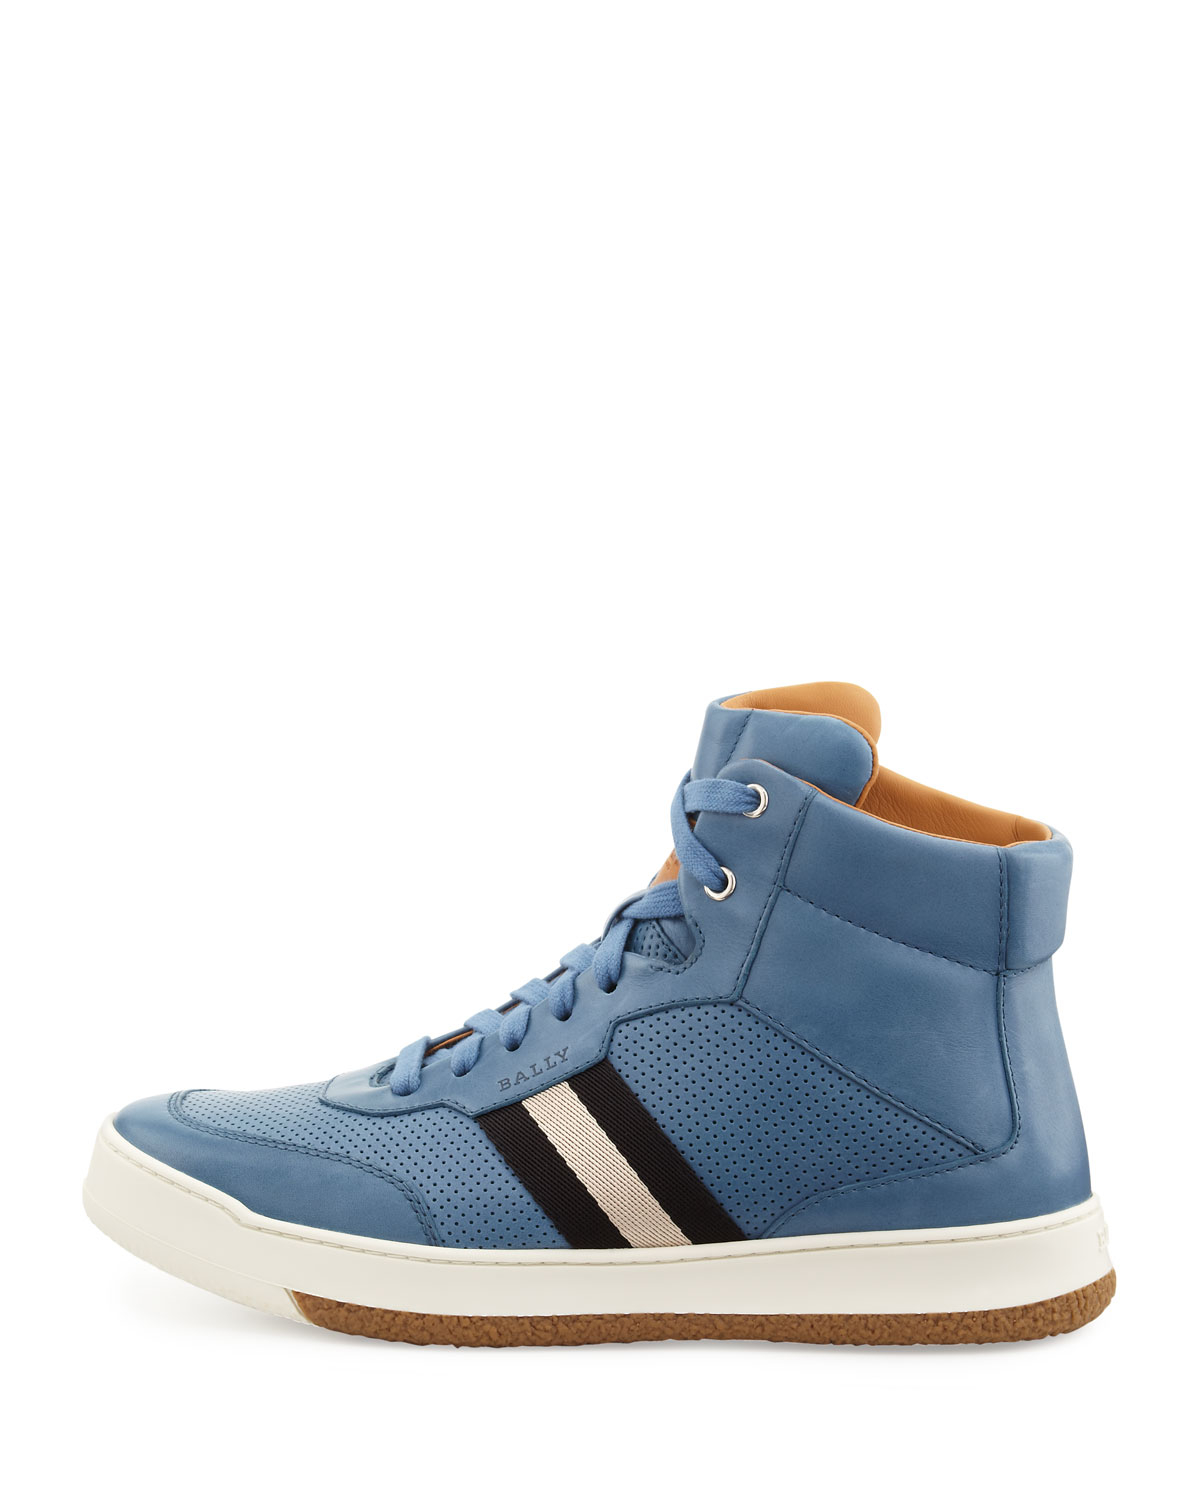 Bally Leather Web-Detail High-Top Sneaker in Blue for Men - Lyst